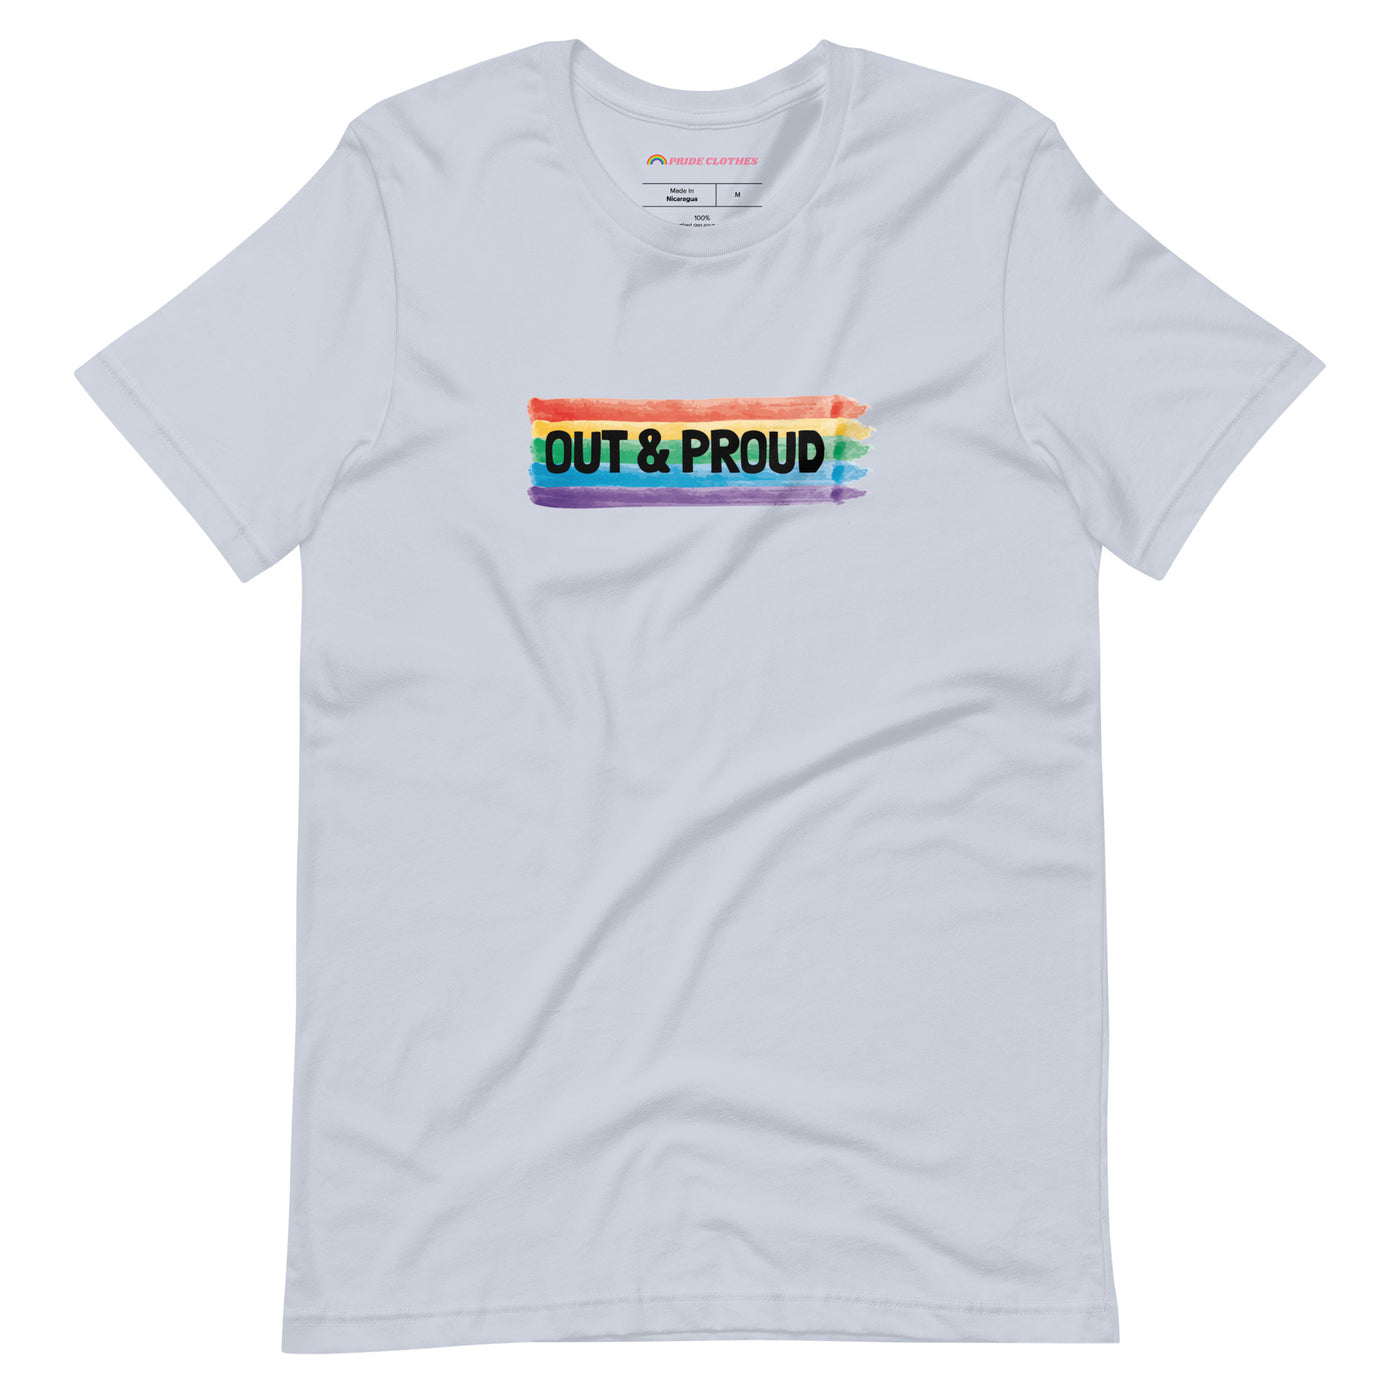 Out & Proud Uncloseted Gay Pride T-shirt